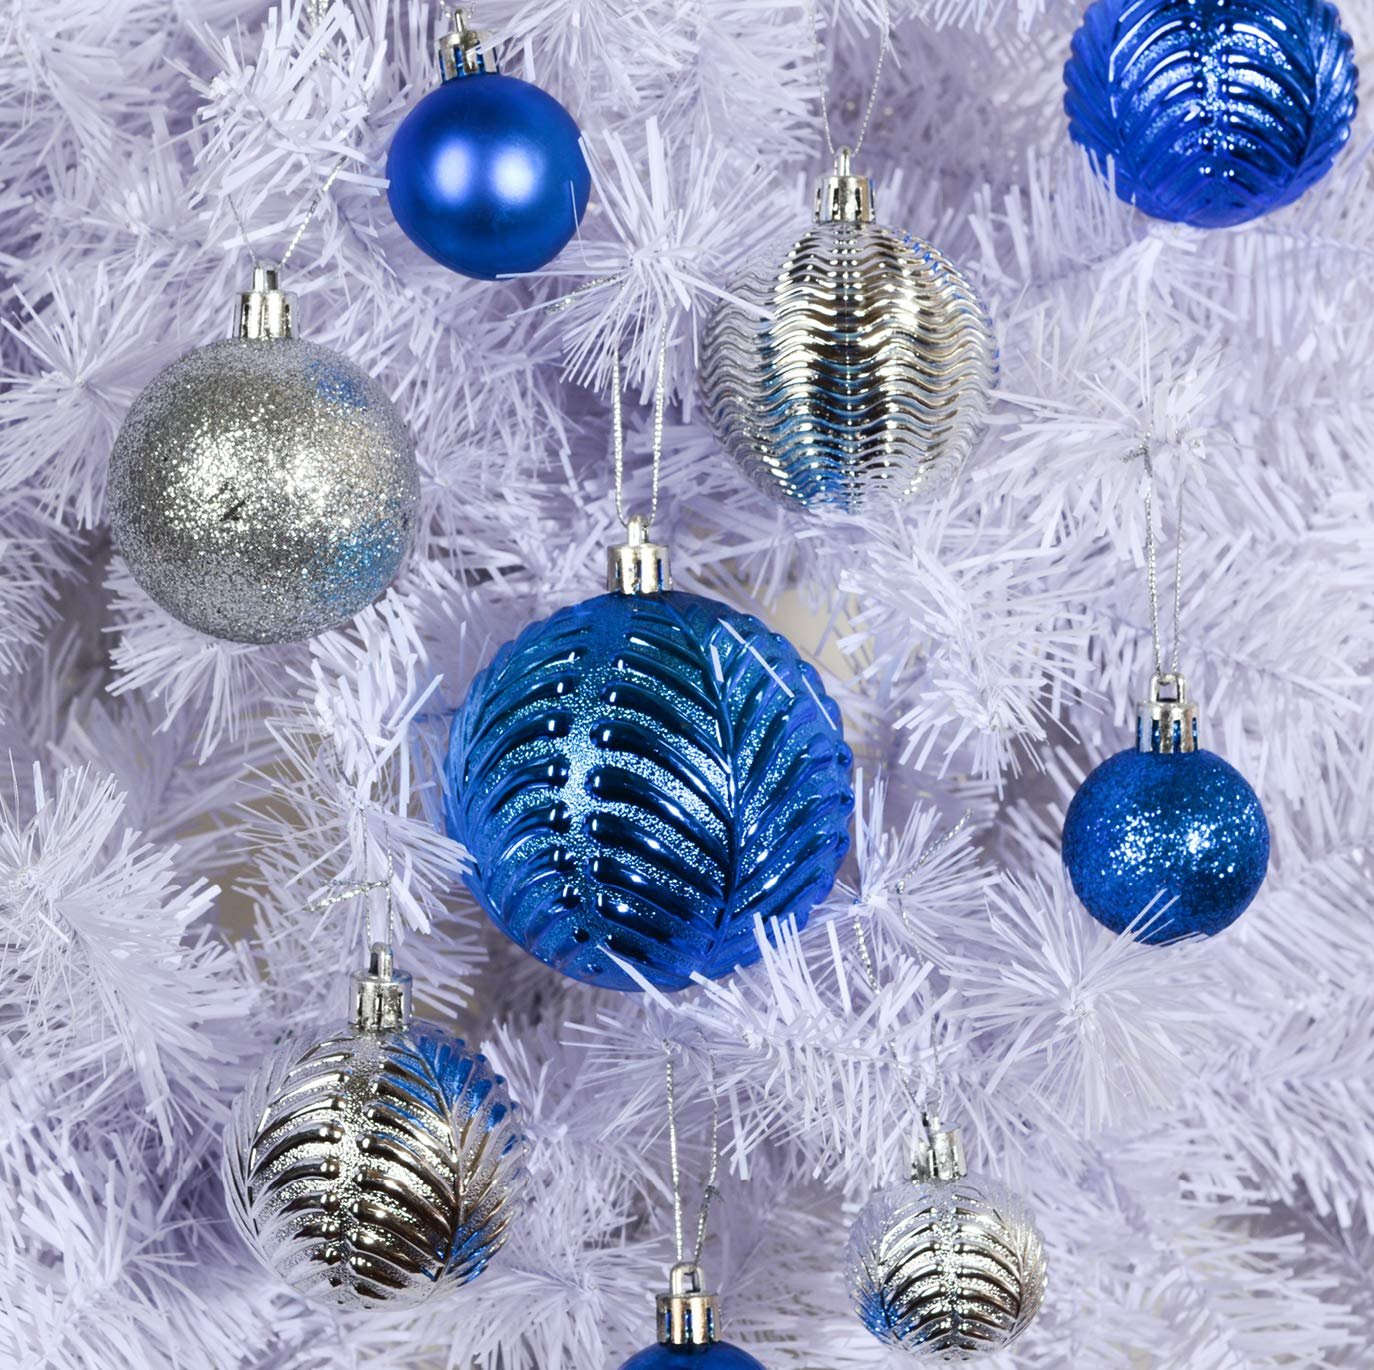 Prextex Blue Christmas Ball Ornaments for Christmas Decorations - 36 Pieces Xmas Tree Shatterproof Ornaments with Hanging Loop for Holiday and Party Decoration (Combo of 6 Styles in 3 Sizes)